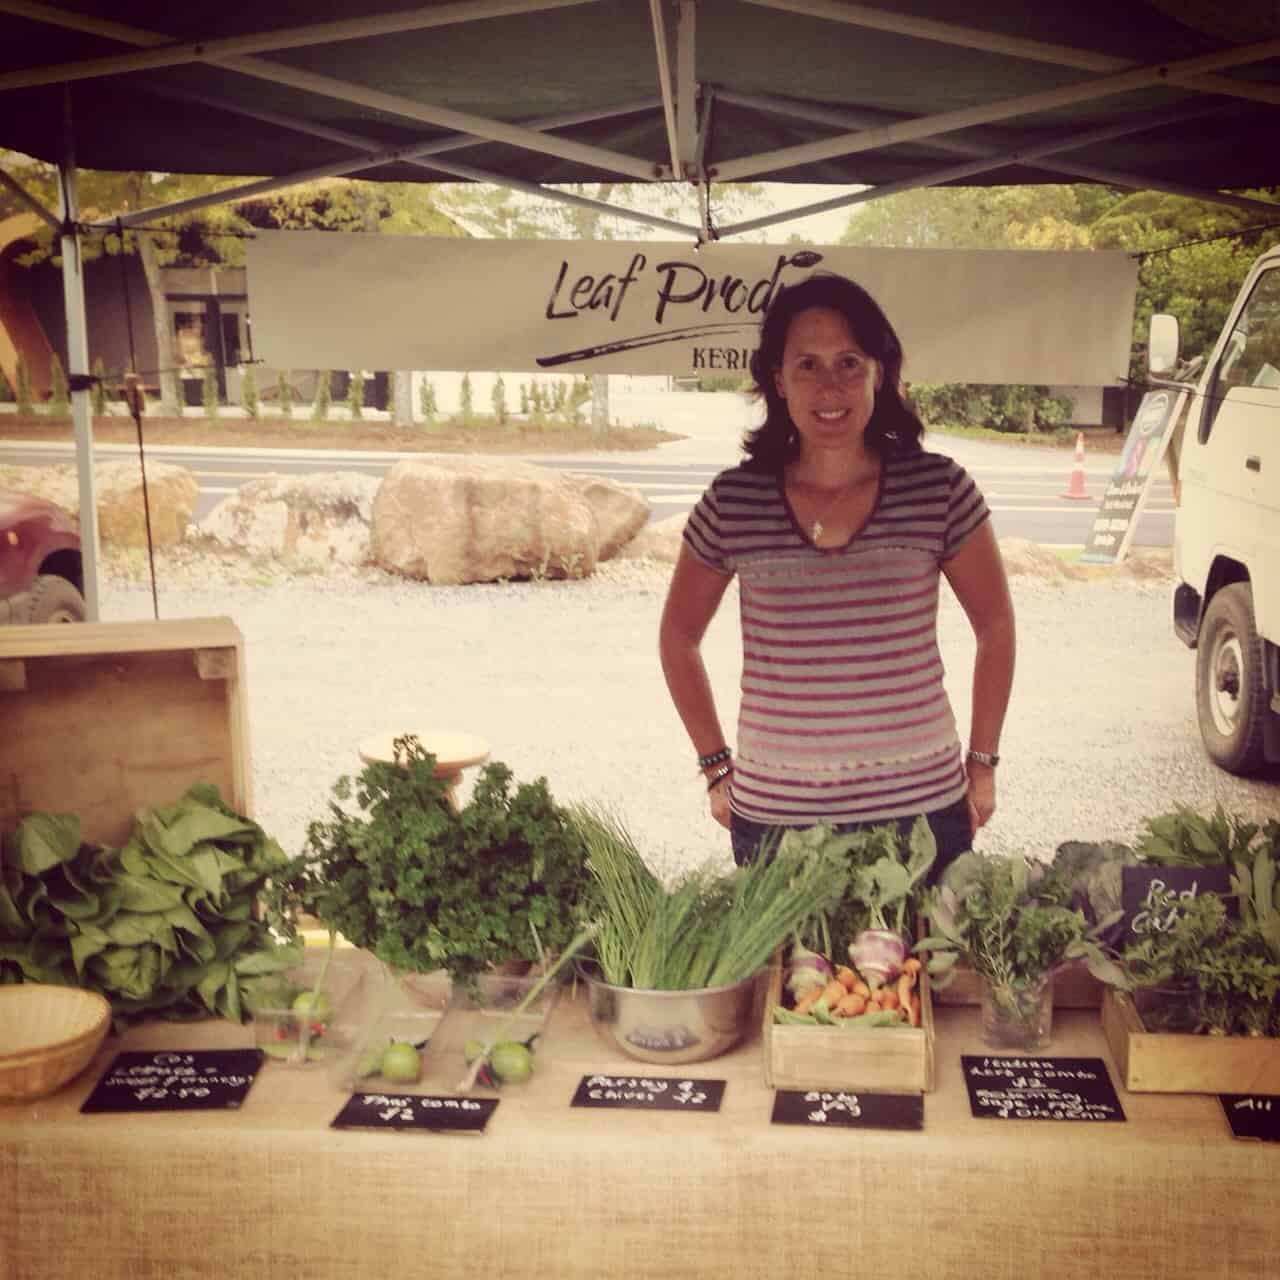 I sometimes have a stall at The Old Packhouse Market, Kerikeri, for Leaf Produce, selling my homegrown lettuces and herbs.